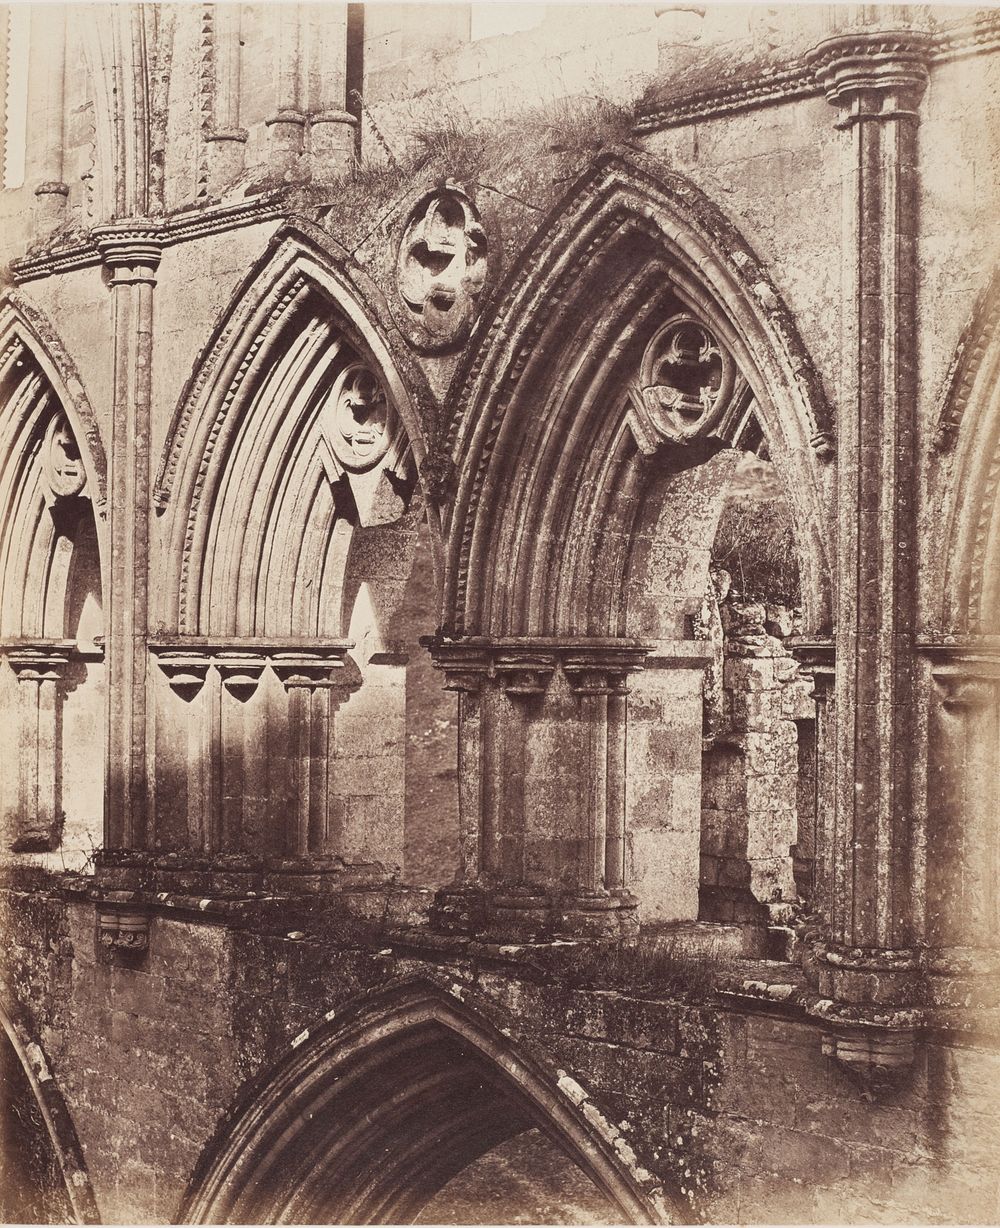 Rivaulx Abbey. The Triforium Arches. From the album: A photographic tour among the Abbeys of Yorkshire; 1856; Bell and Daldy…